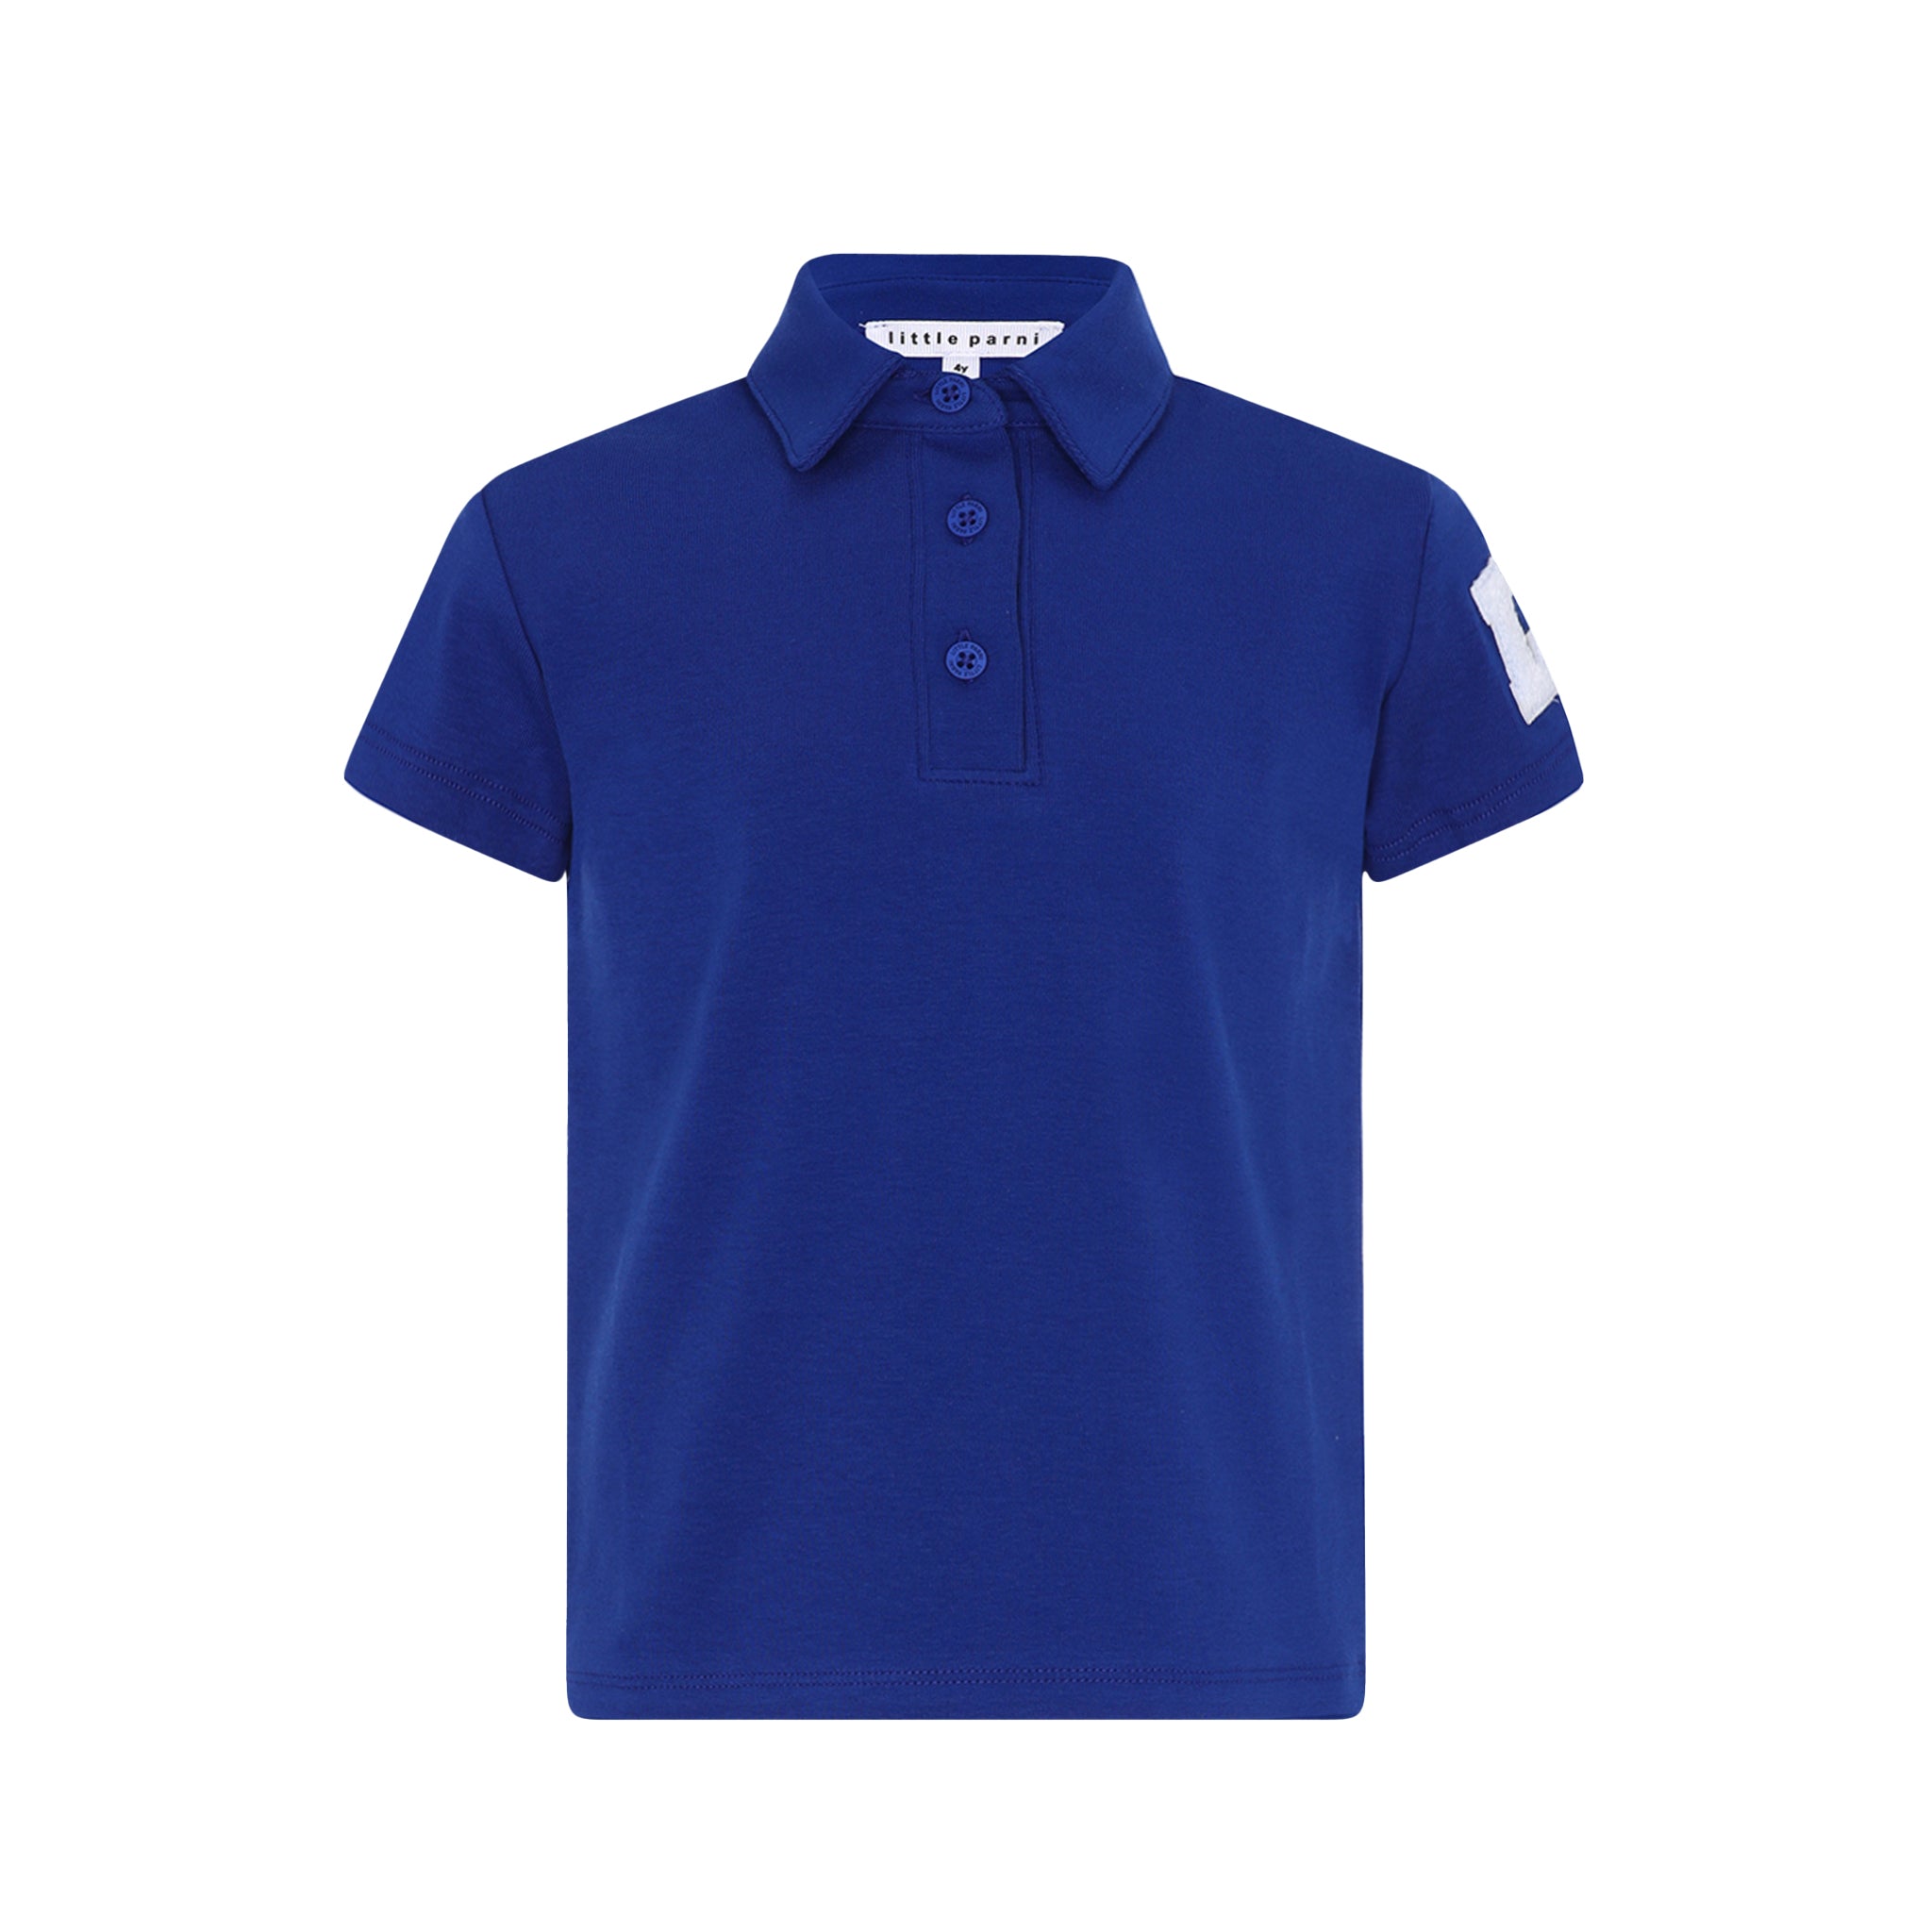 DKNY BOYS' POLO Shirt - 2 Pack Classic Fit Short Sleeve Pique Polo -  Comfort Str $45.90 - PicClick